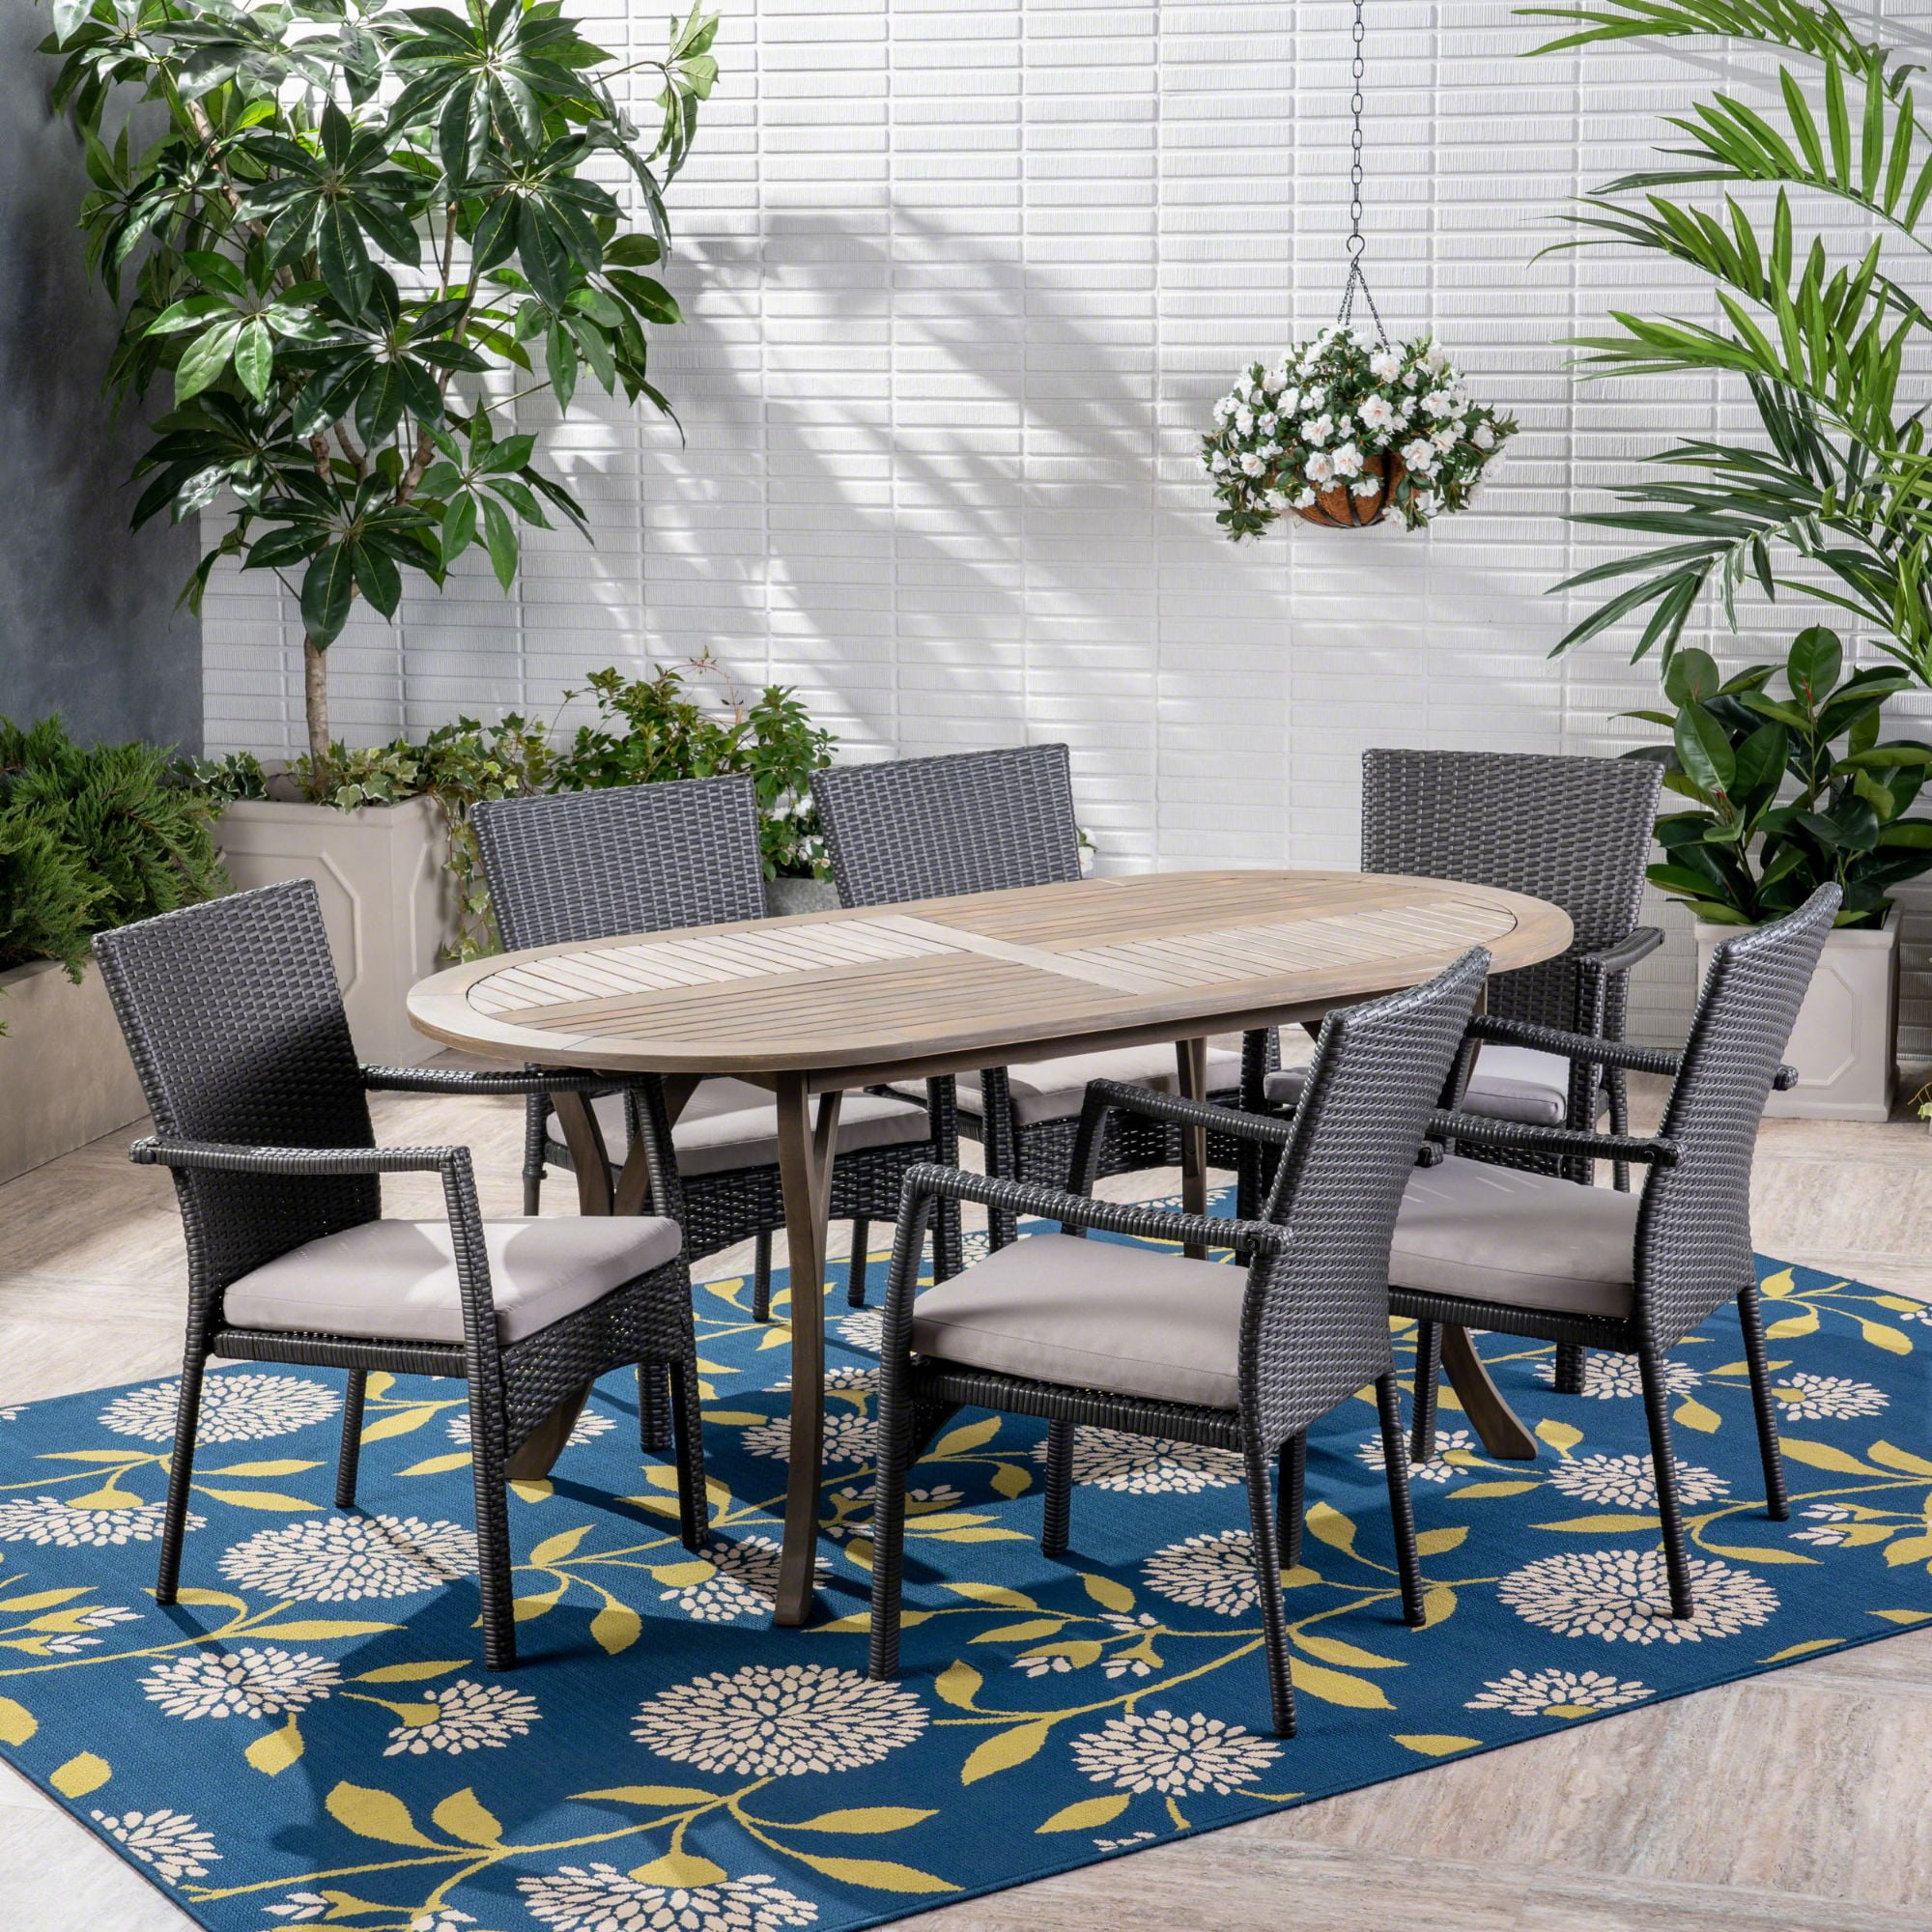 7-Piece Contemporary Outdoor Furniture Patio Dining Set - Gray Cushions